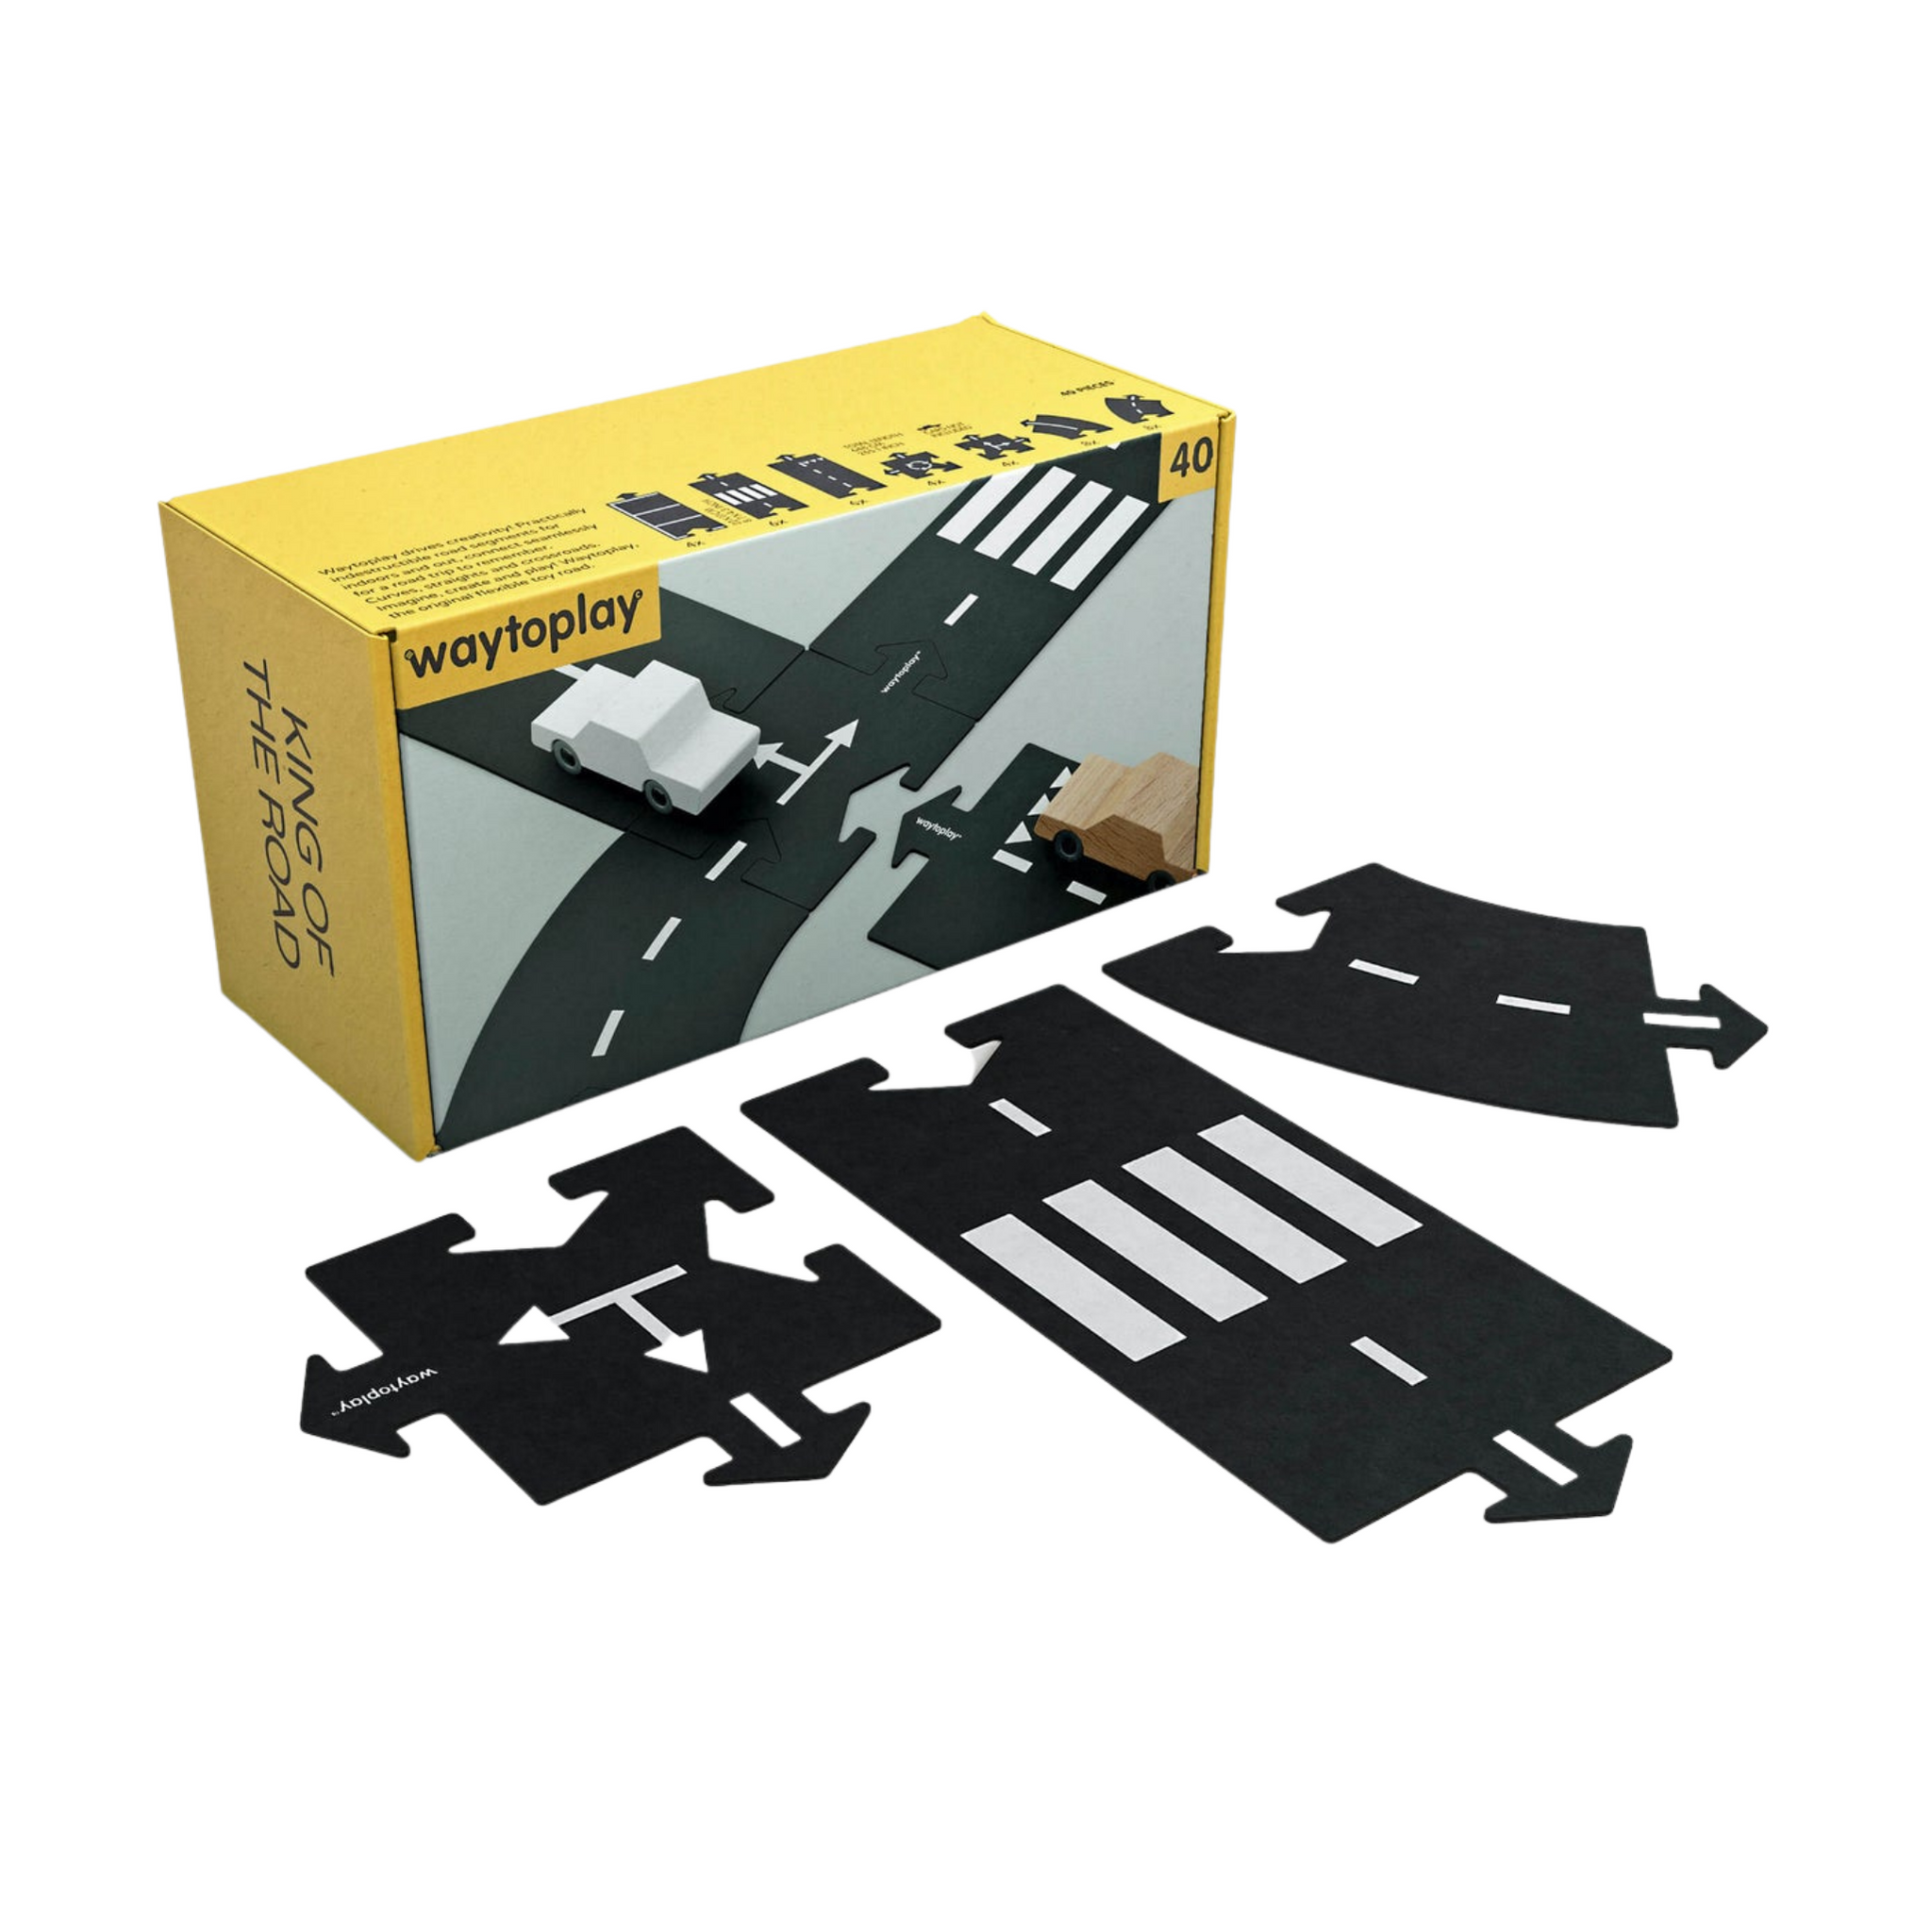 Waytoplay Flexible Toy Road Set - King of the Road